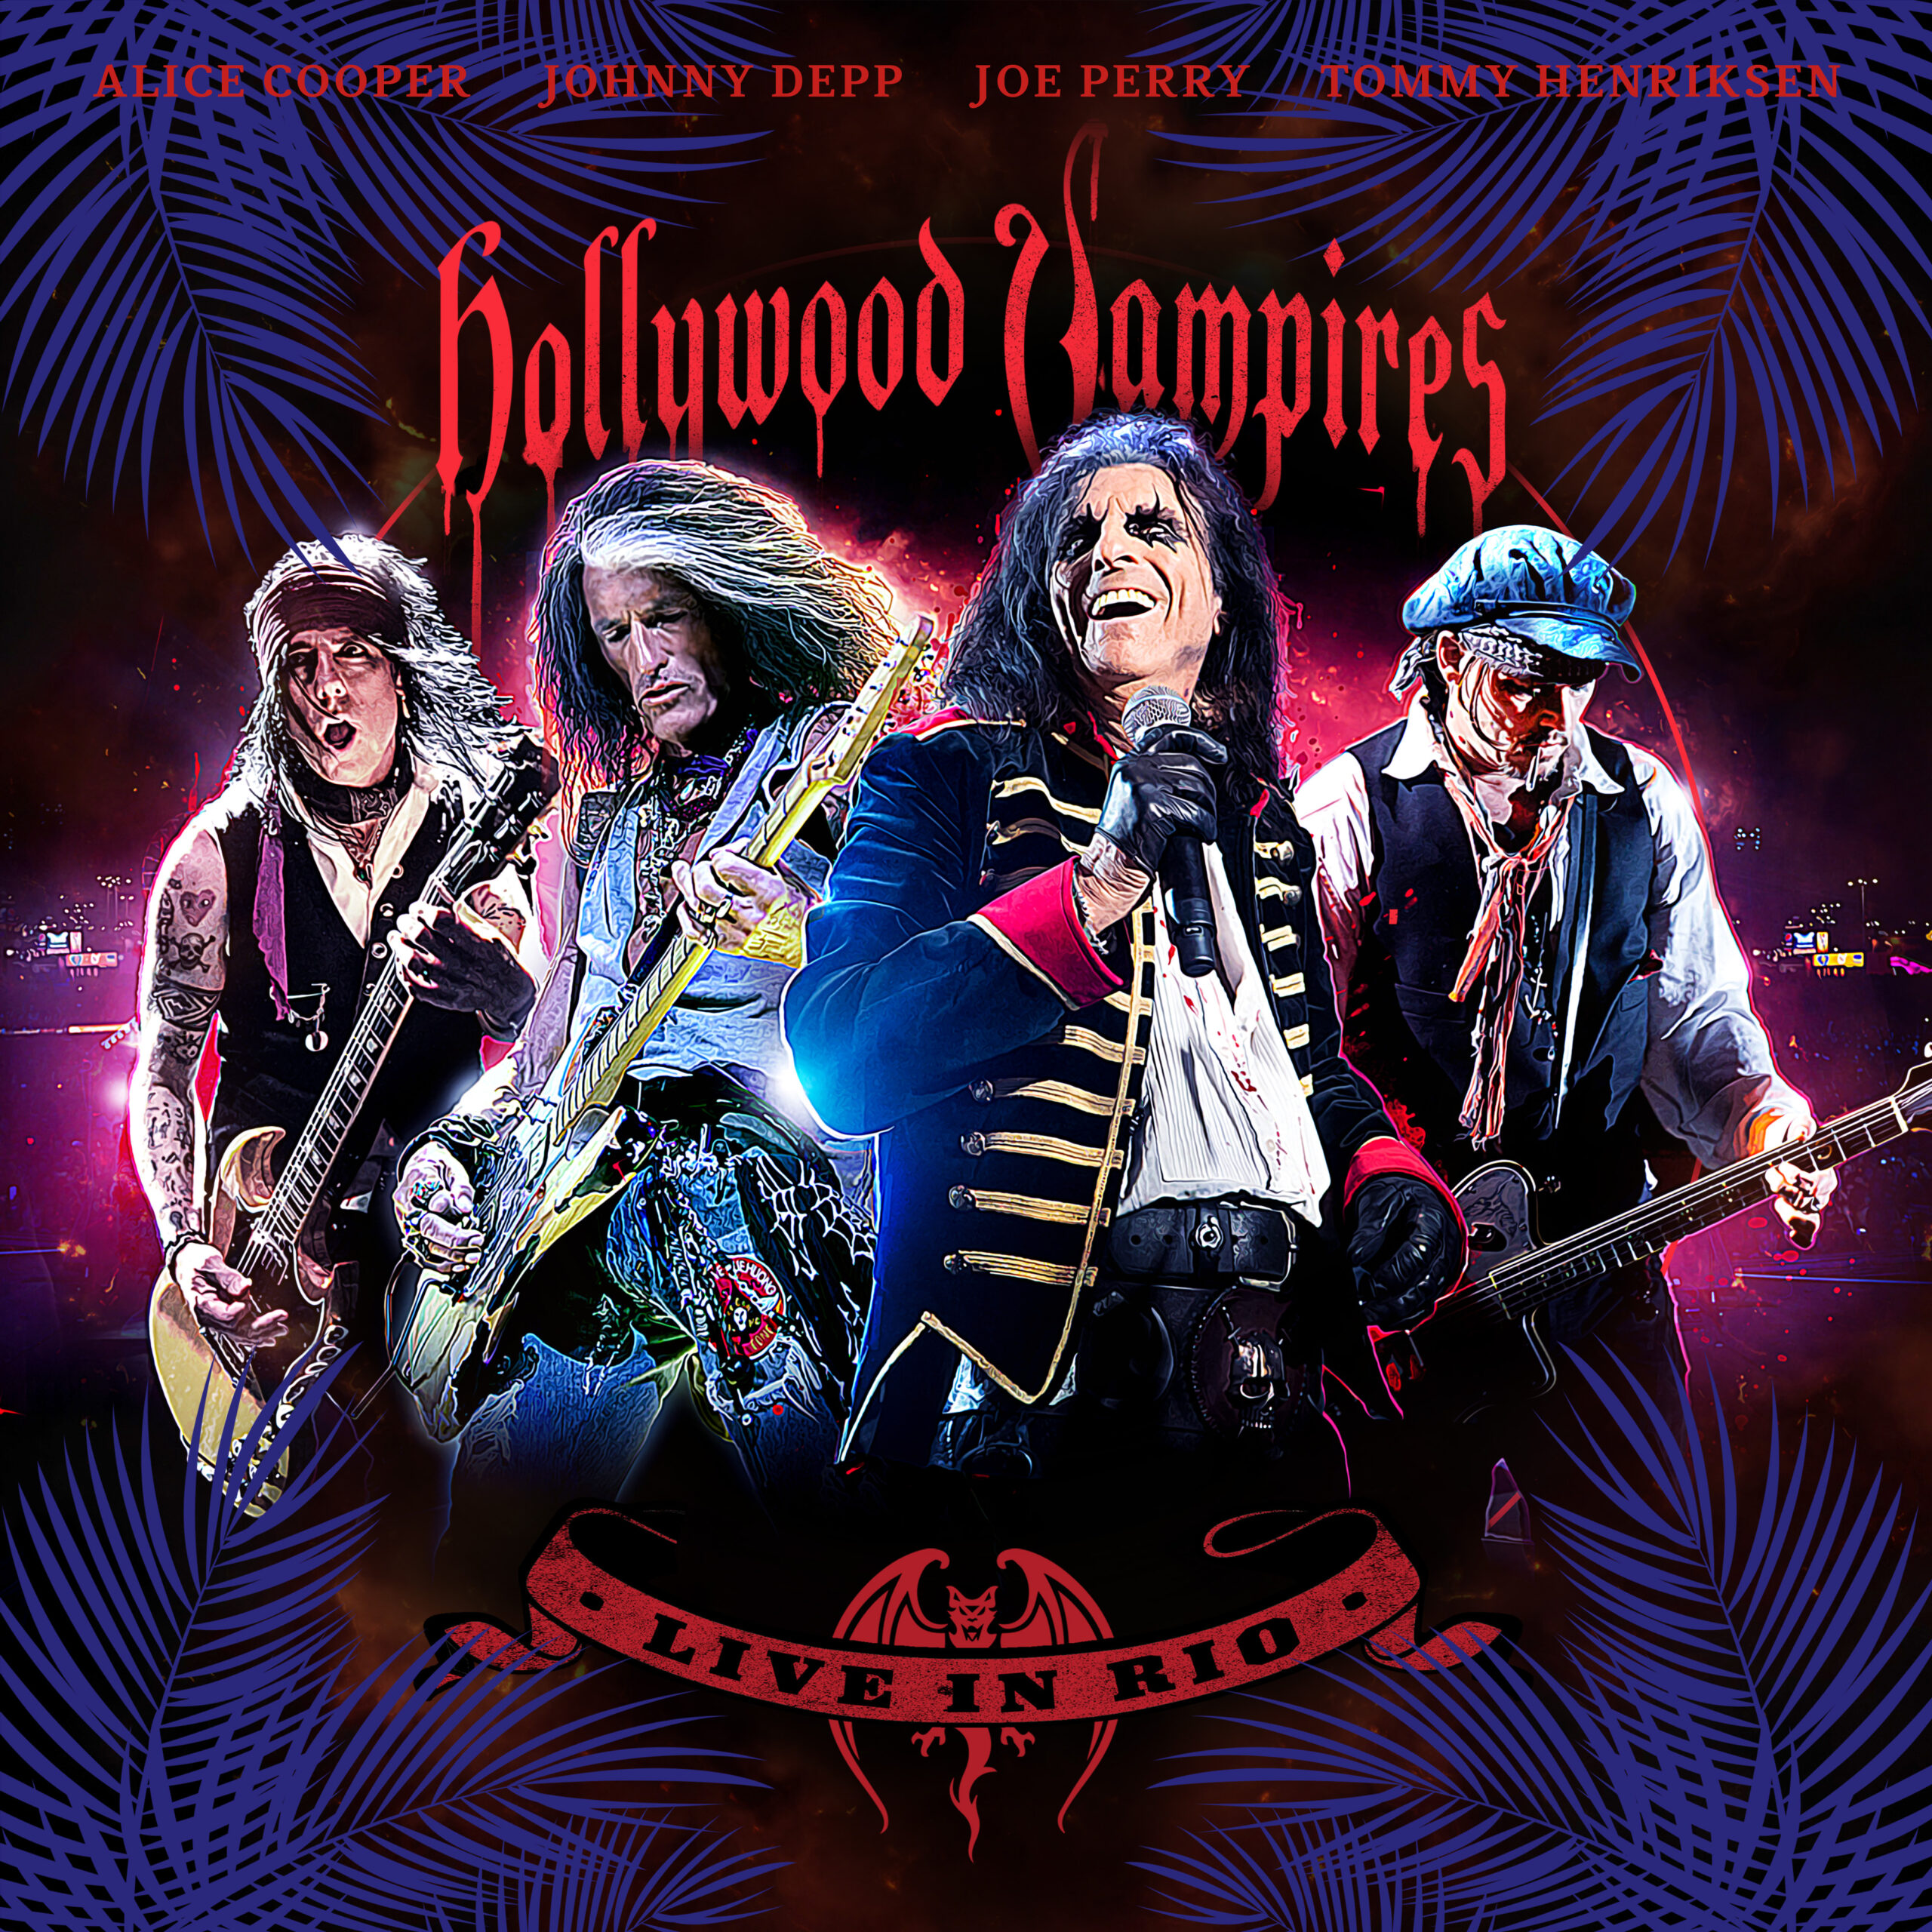 Hollywood Vampires (USA) – Live In Rio